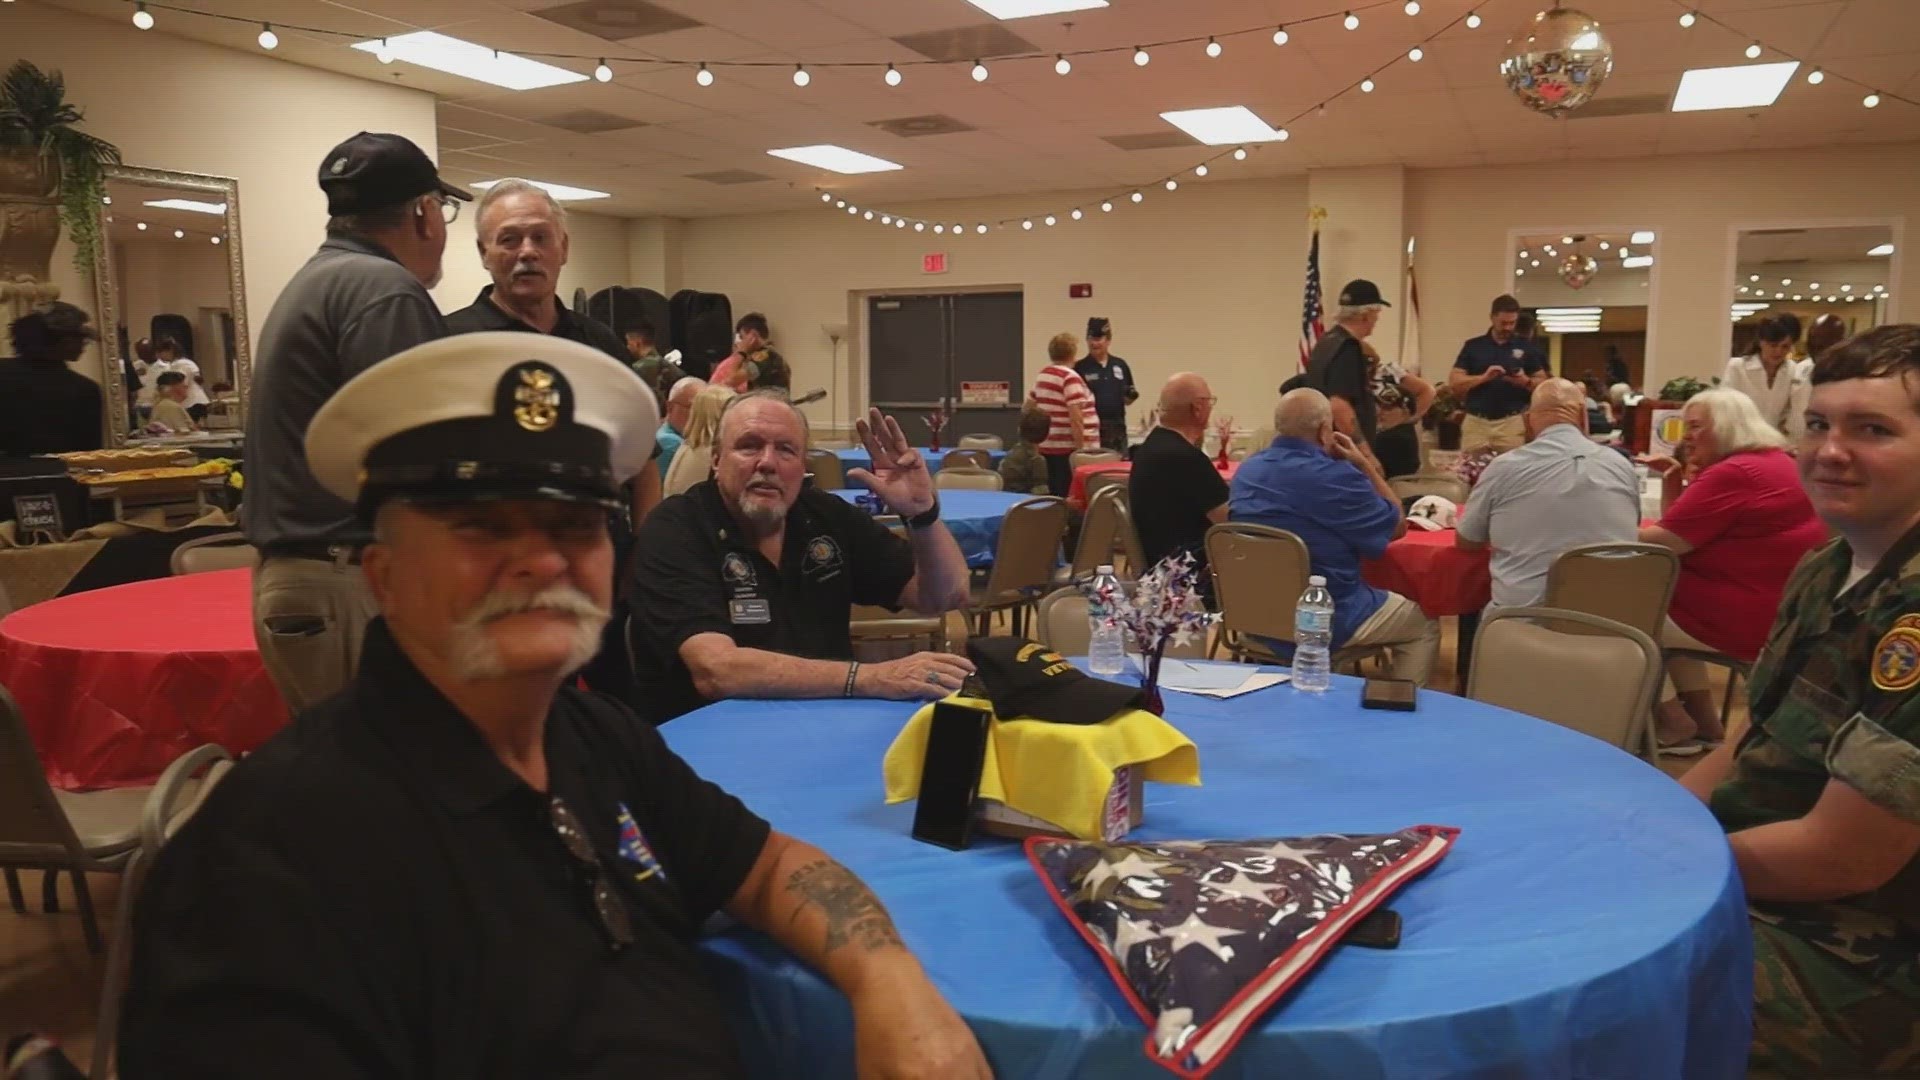 The luncheon was held Saturday at the Elks Lodge near Beach Boulevard in Jacksonville.